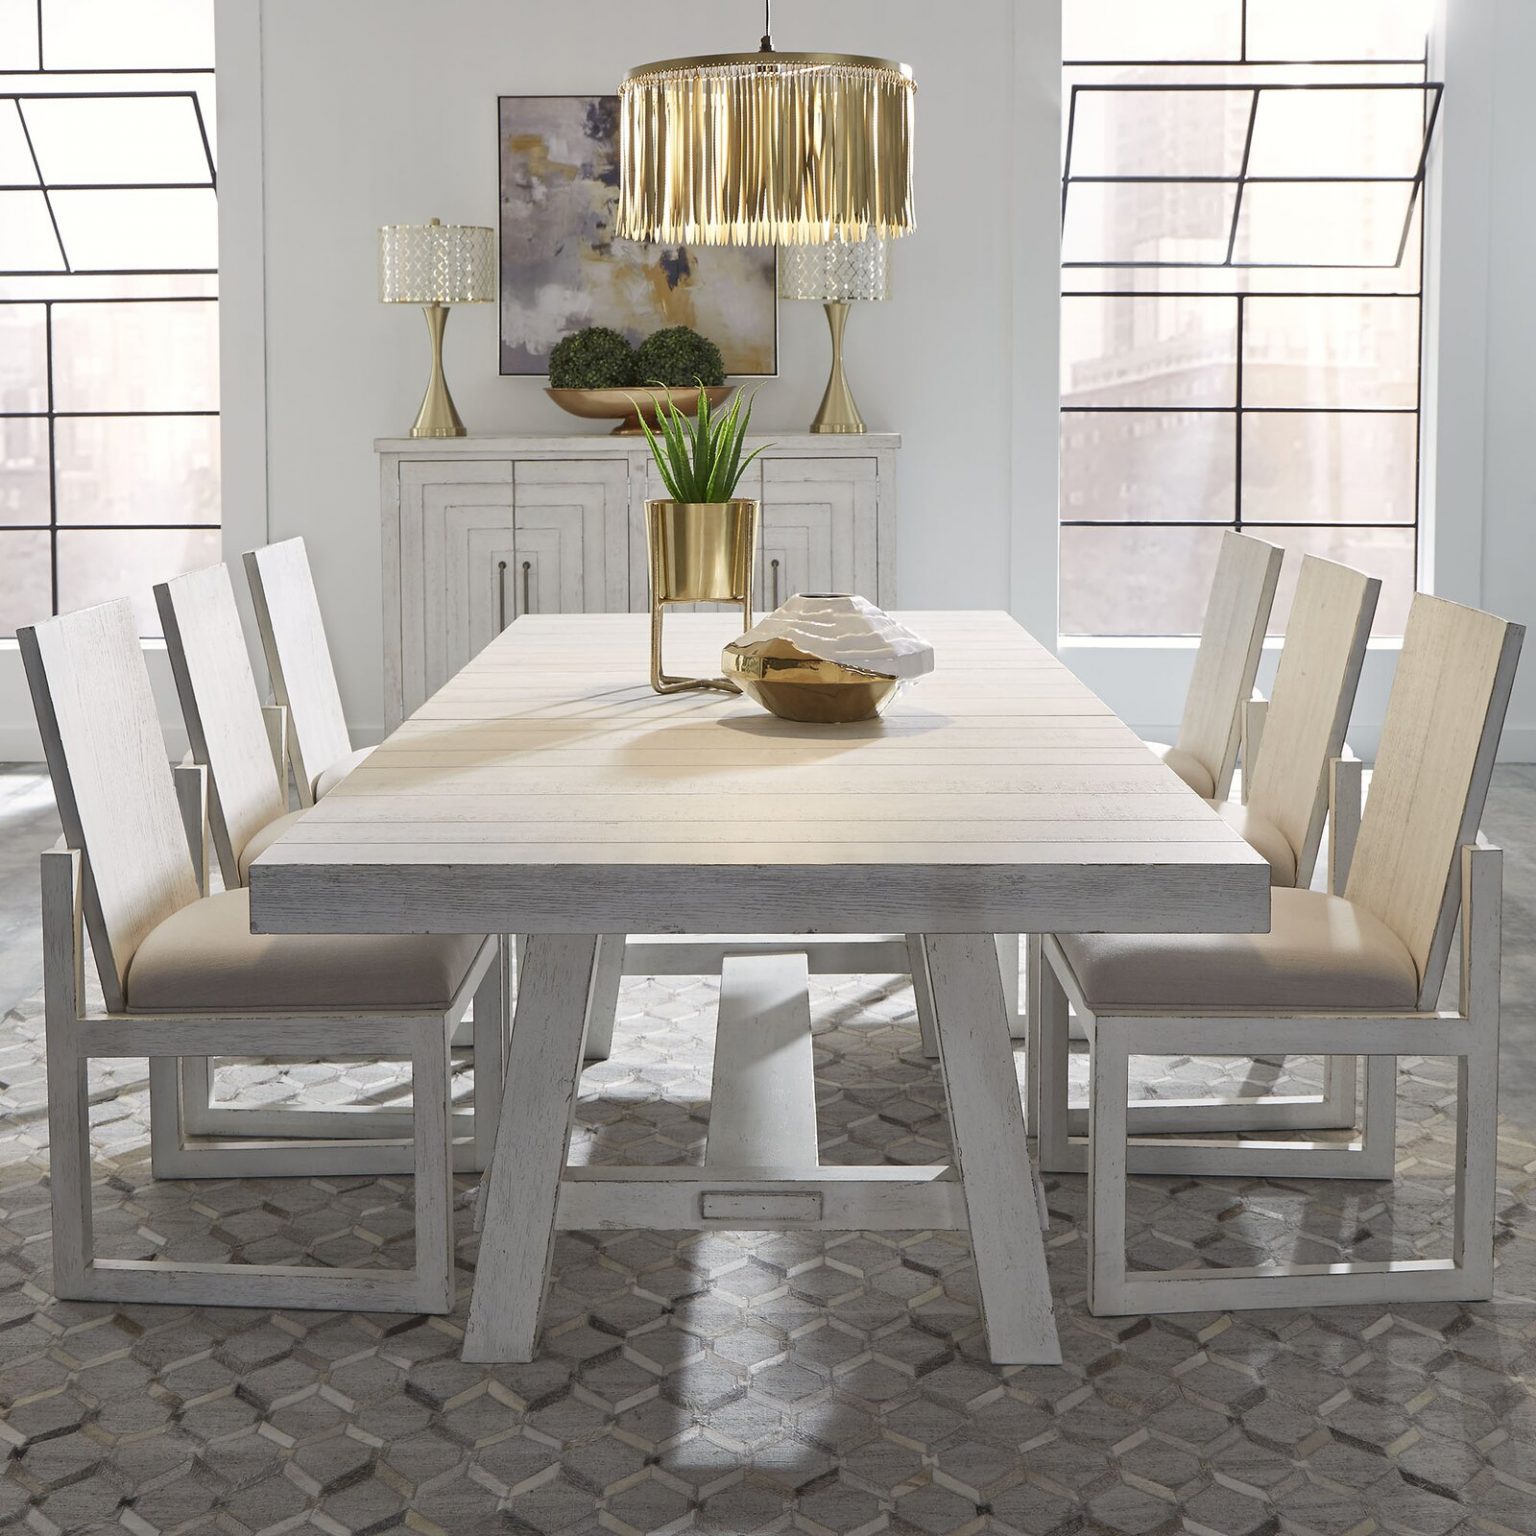 white farmhouse dining table large size trestle base seats 10 guests